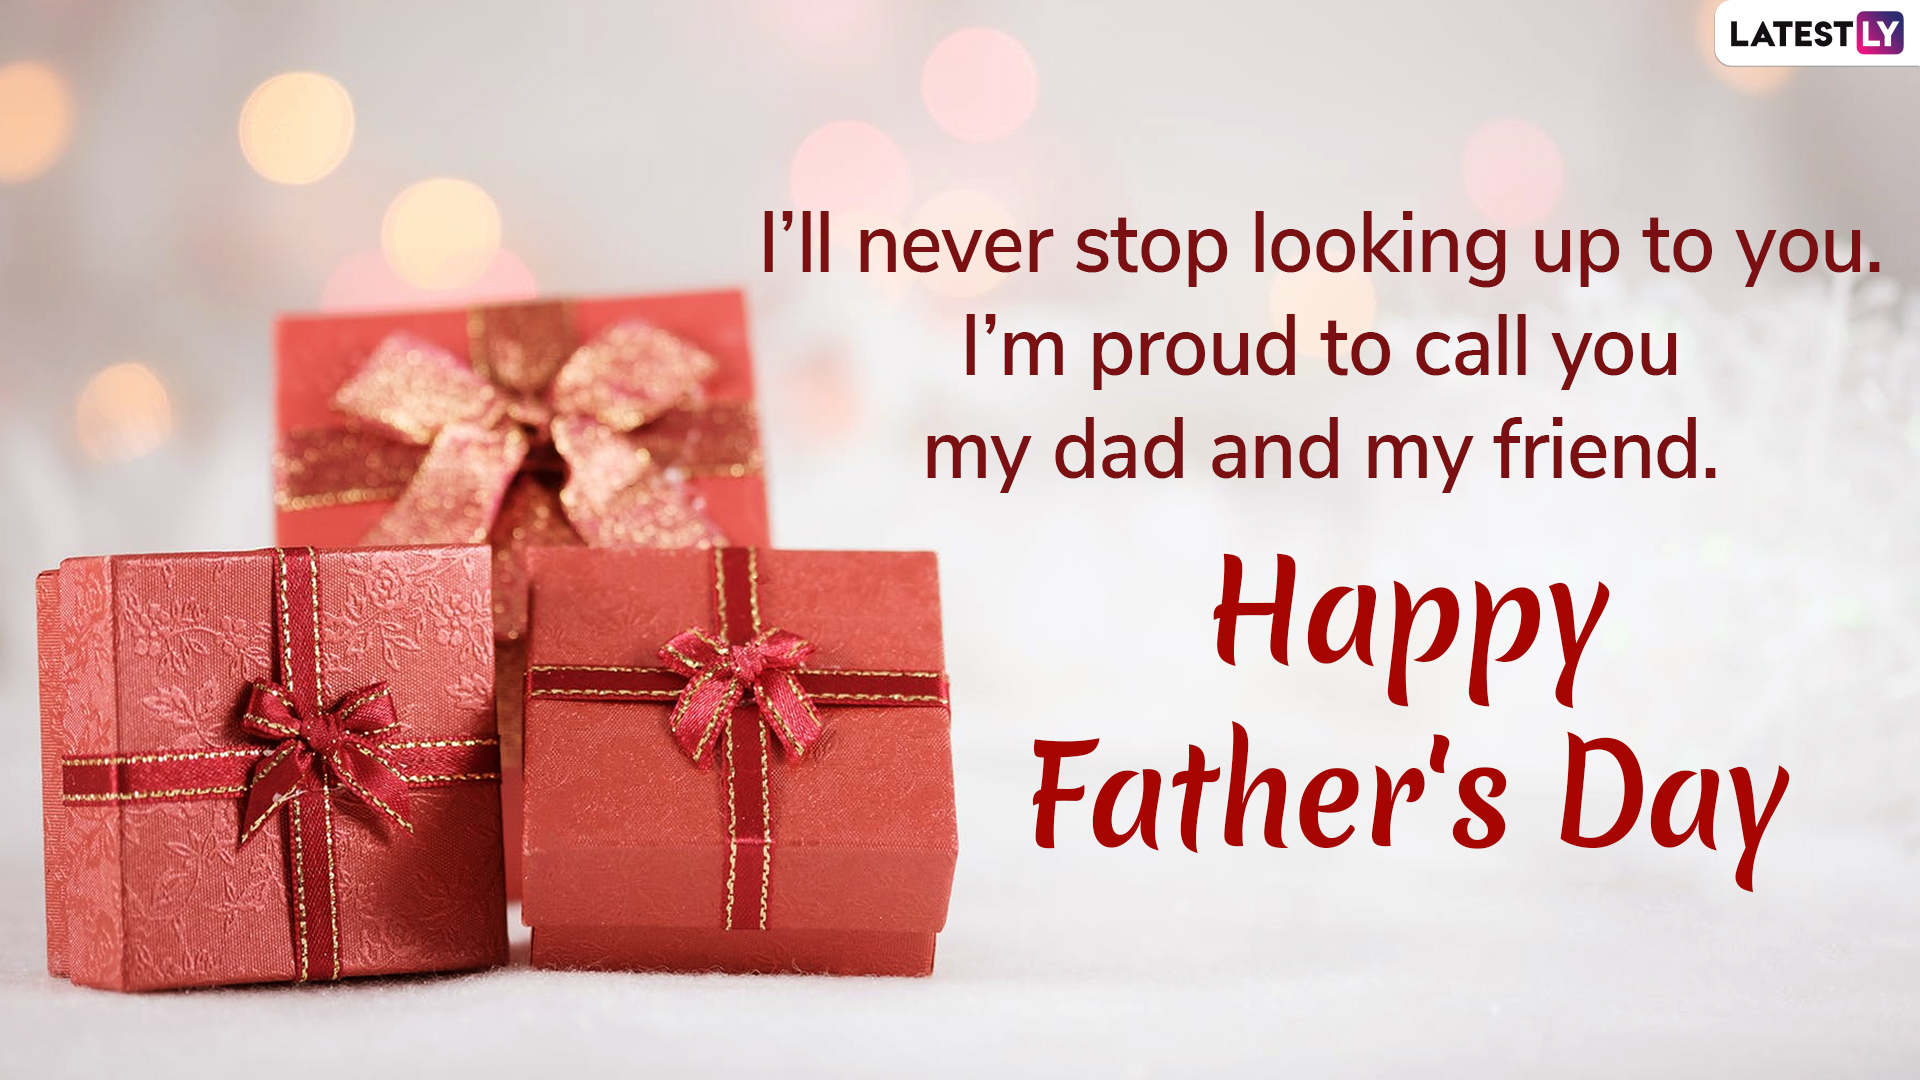 Happy Father’s Day 2019 Wishes Whatsapp Stickers Image Greetings Quotes Facebook